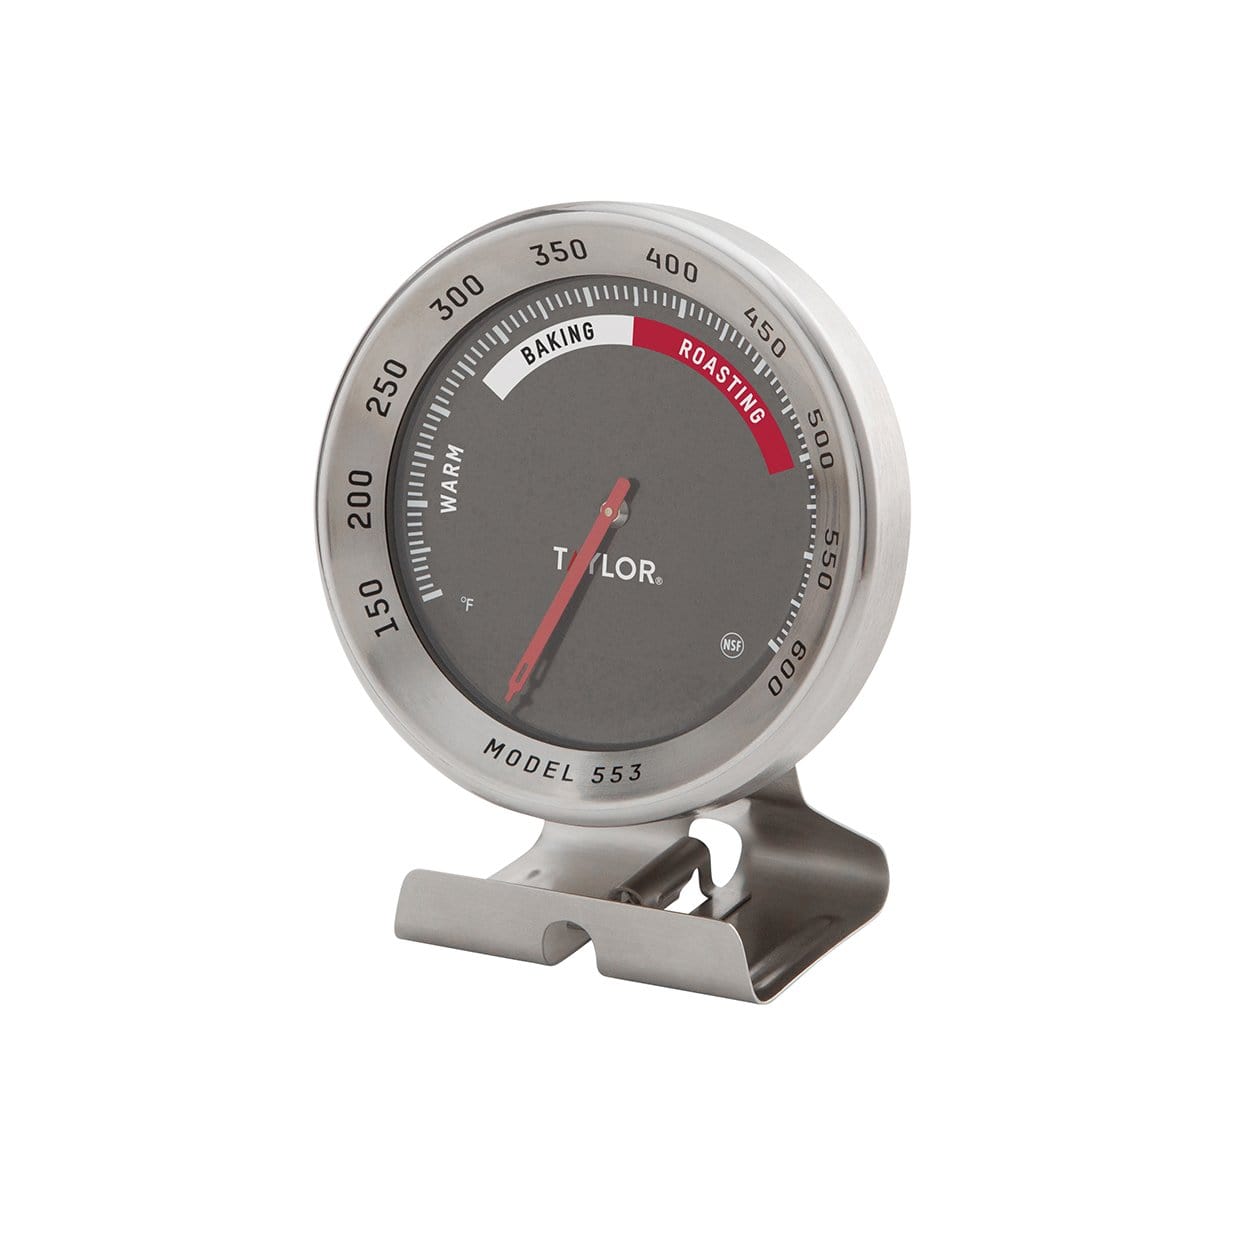 Taylor® Oven Dial Thermometer